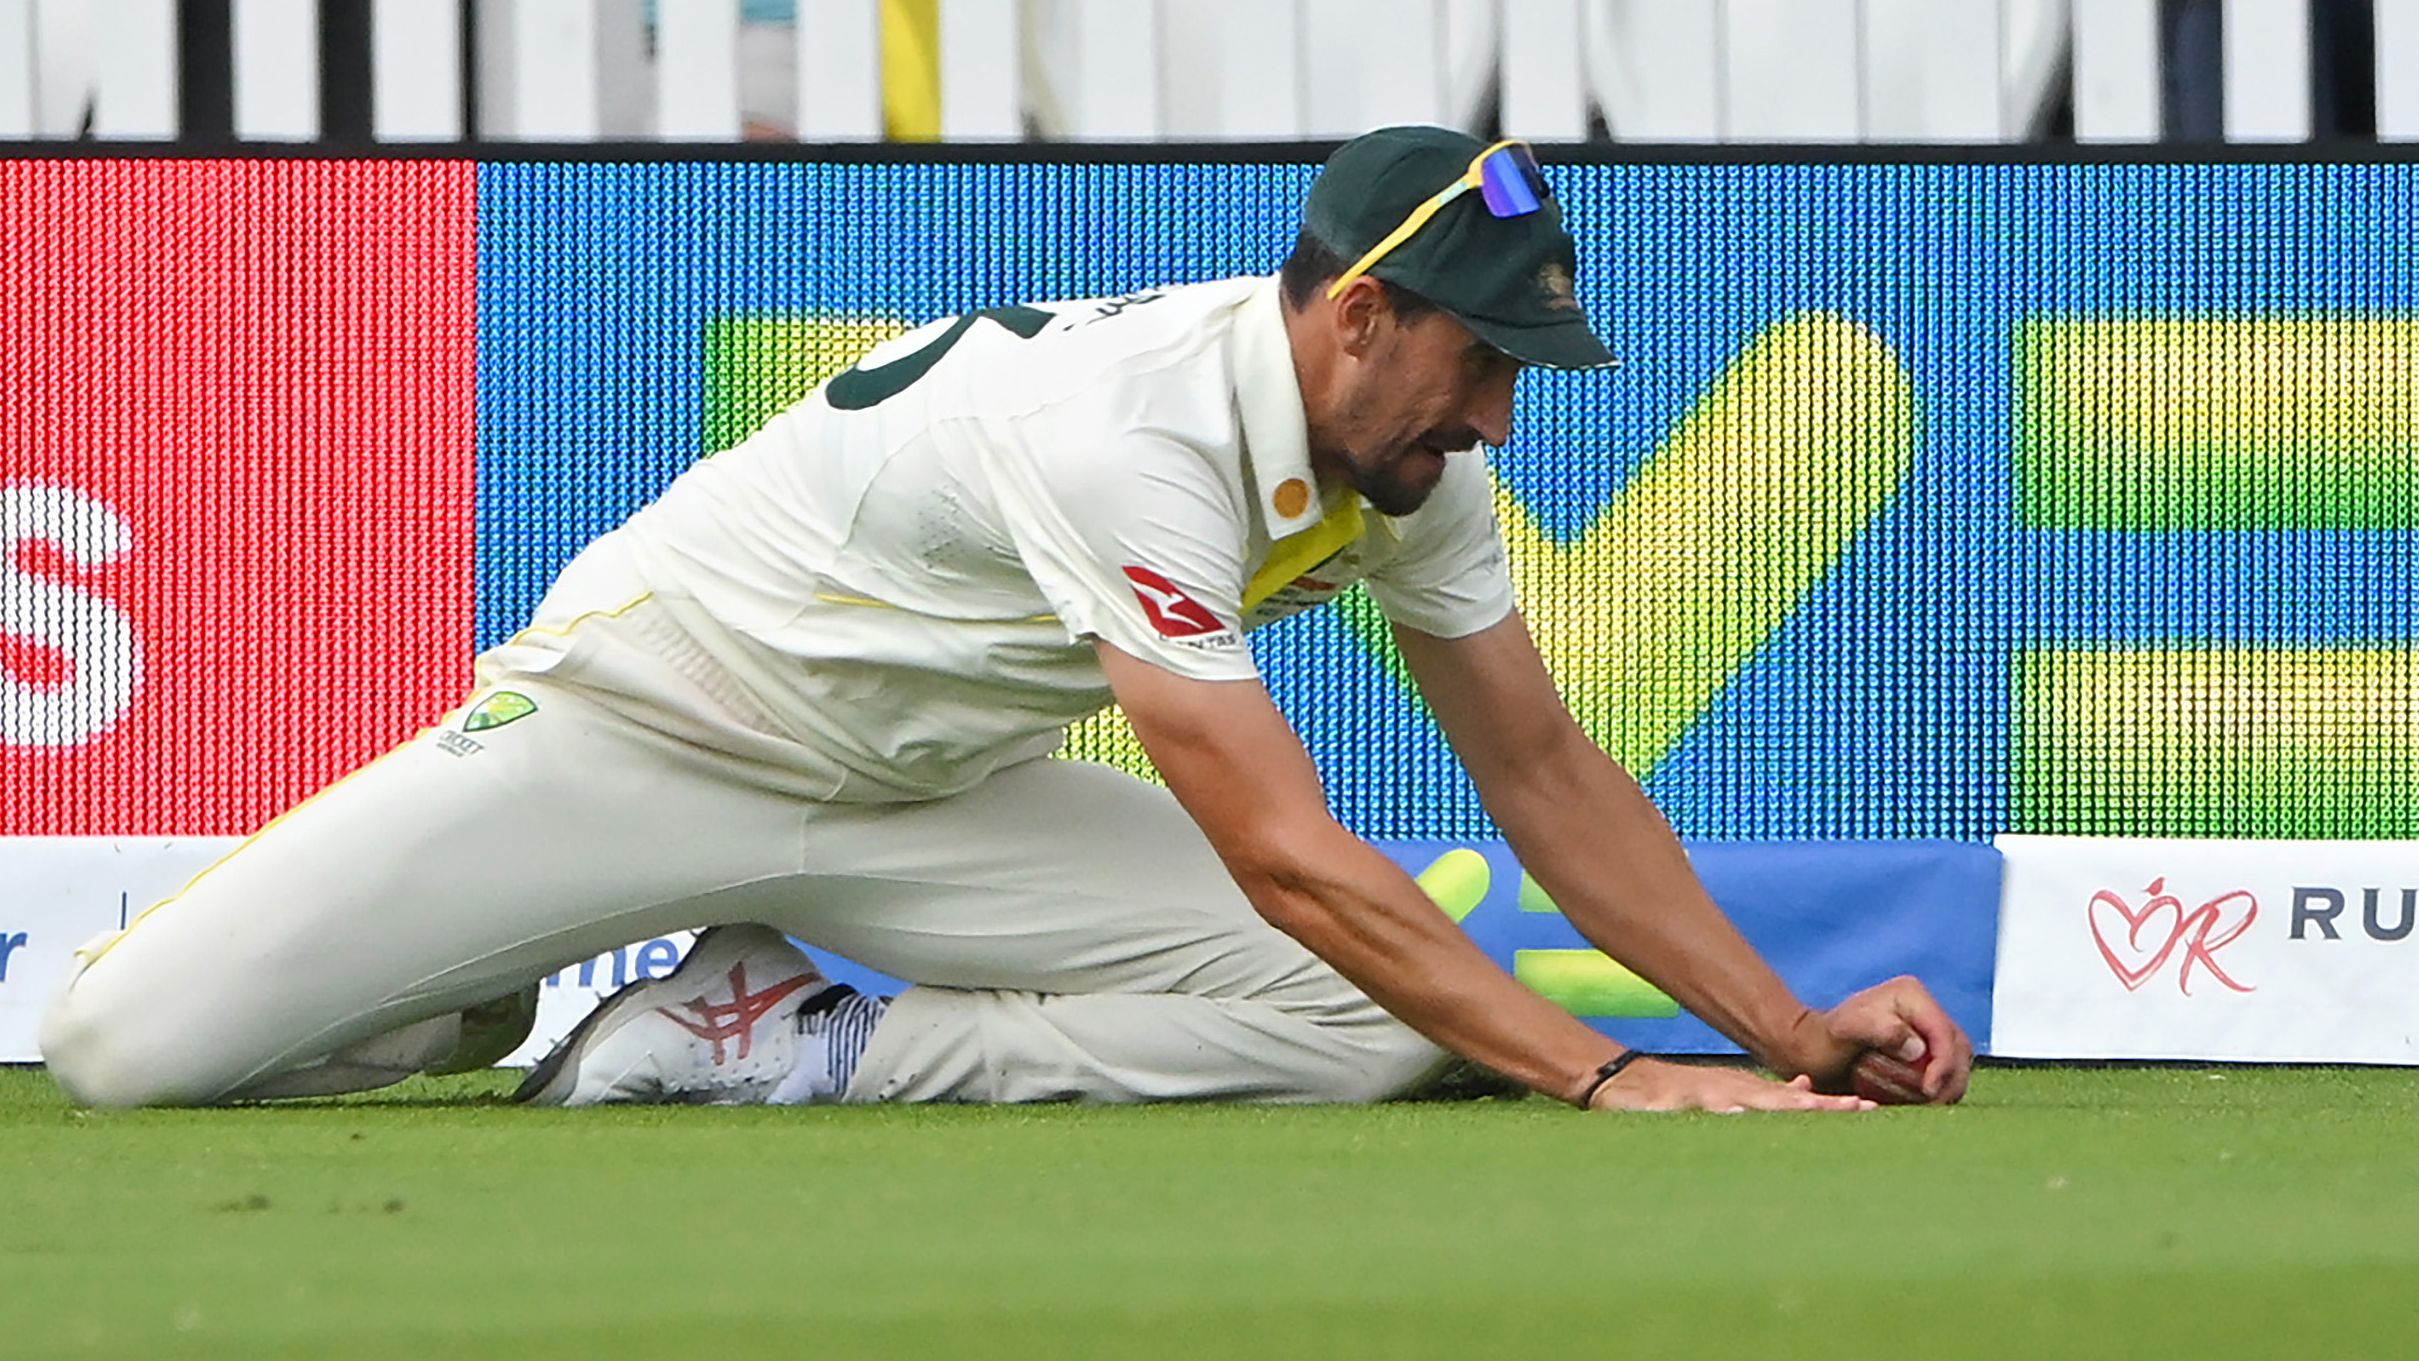 'That is a disgrace': Australia left in disbelief after third umpire's stunning reversal gives England life